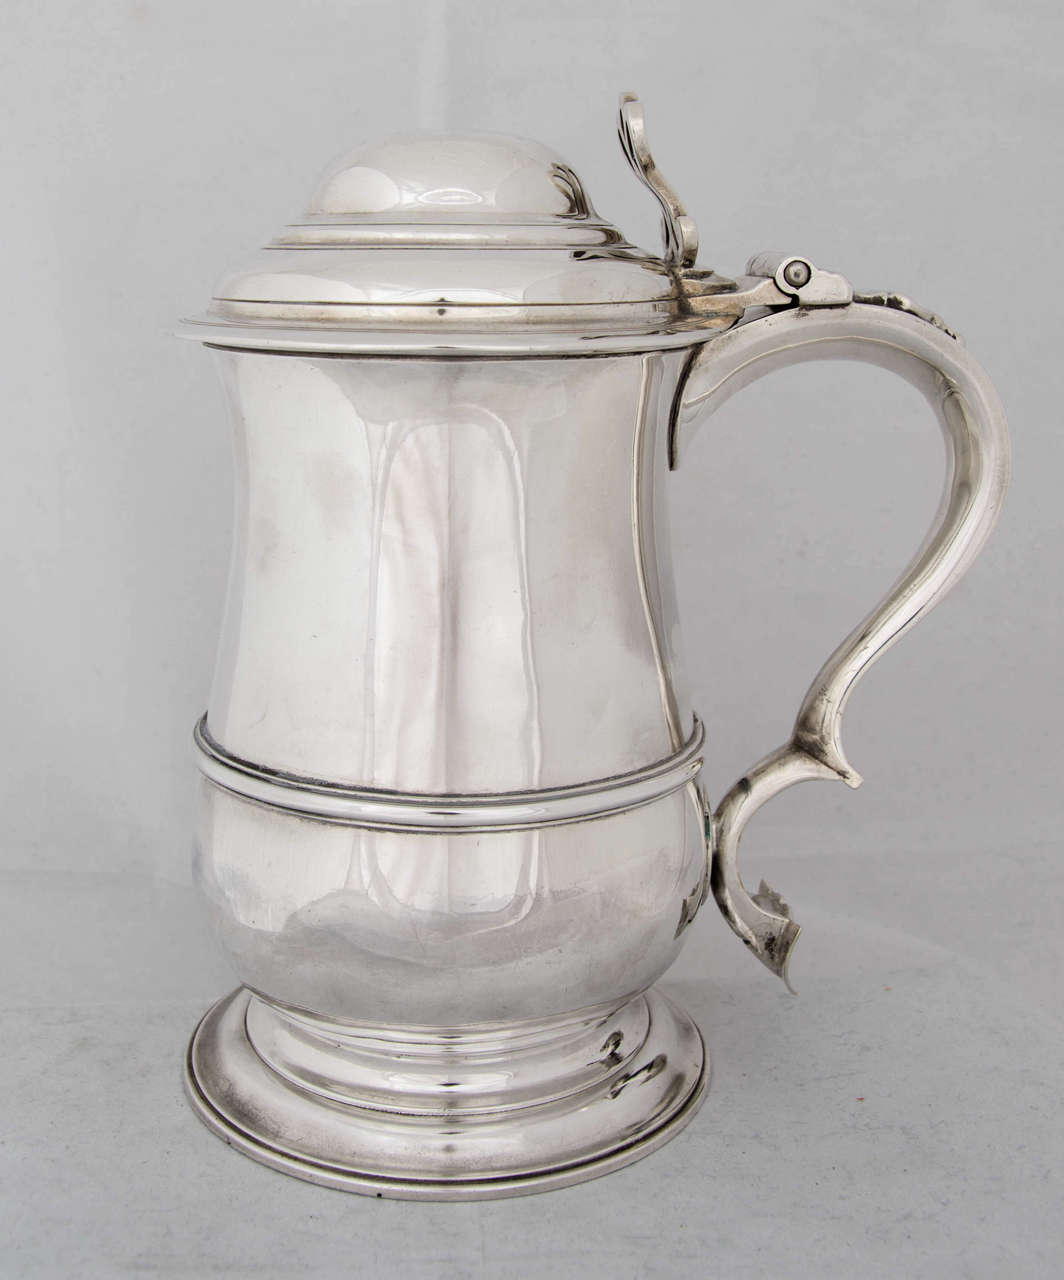 A George III sterling silver Tankard made in London, 1765 by Francis Crump.
The handle is engraved with the initials of the original owner, "IH".
Height is 8".